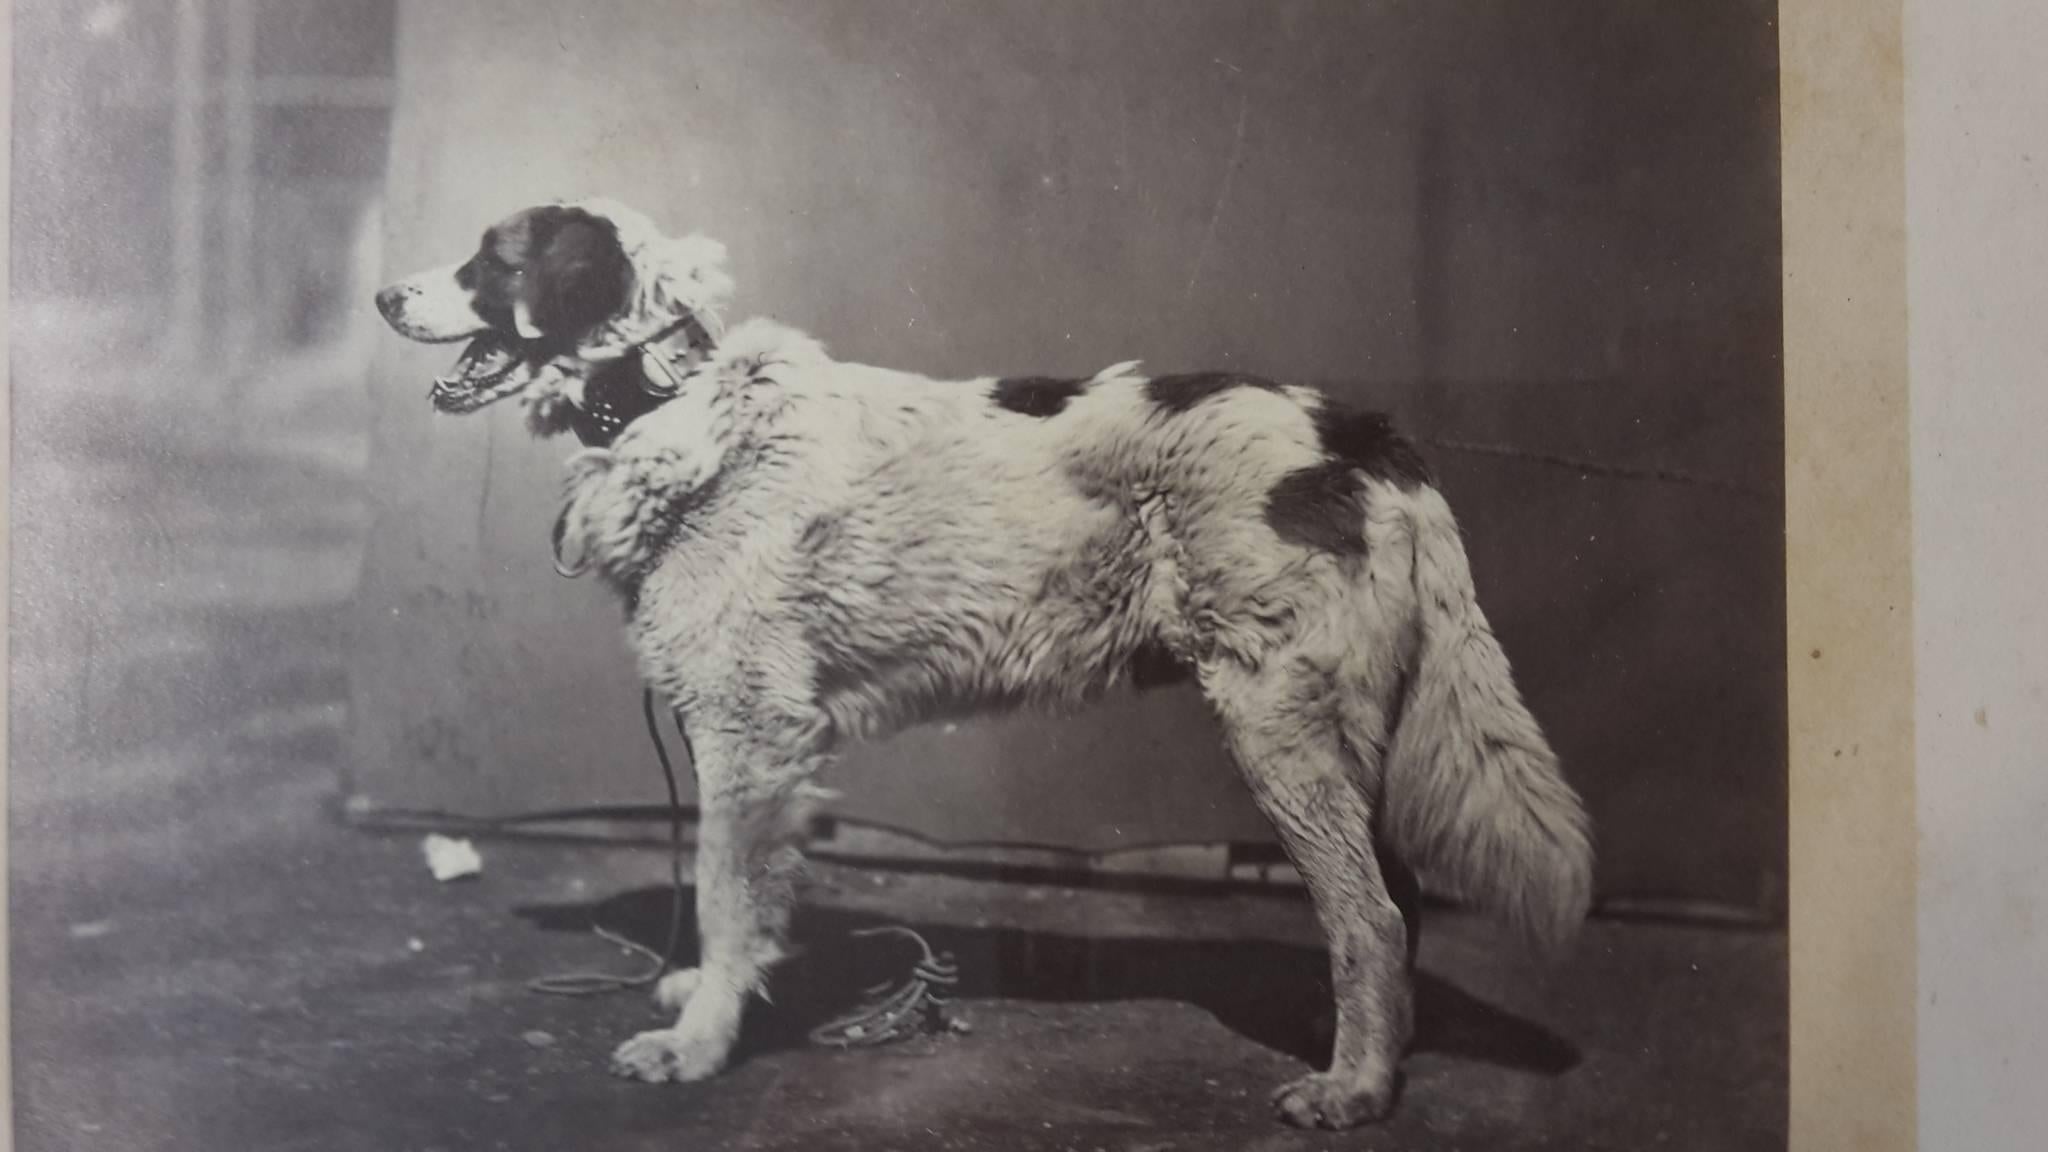 Other Silver Prints from 1870 Portrait of Dog Exposition Canine Des Champs Elysees For Sale